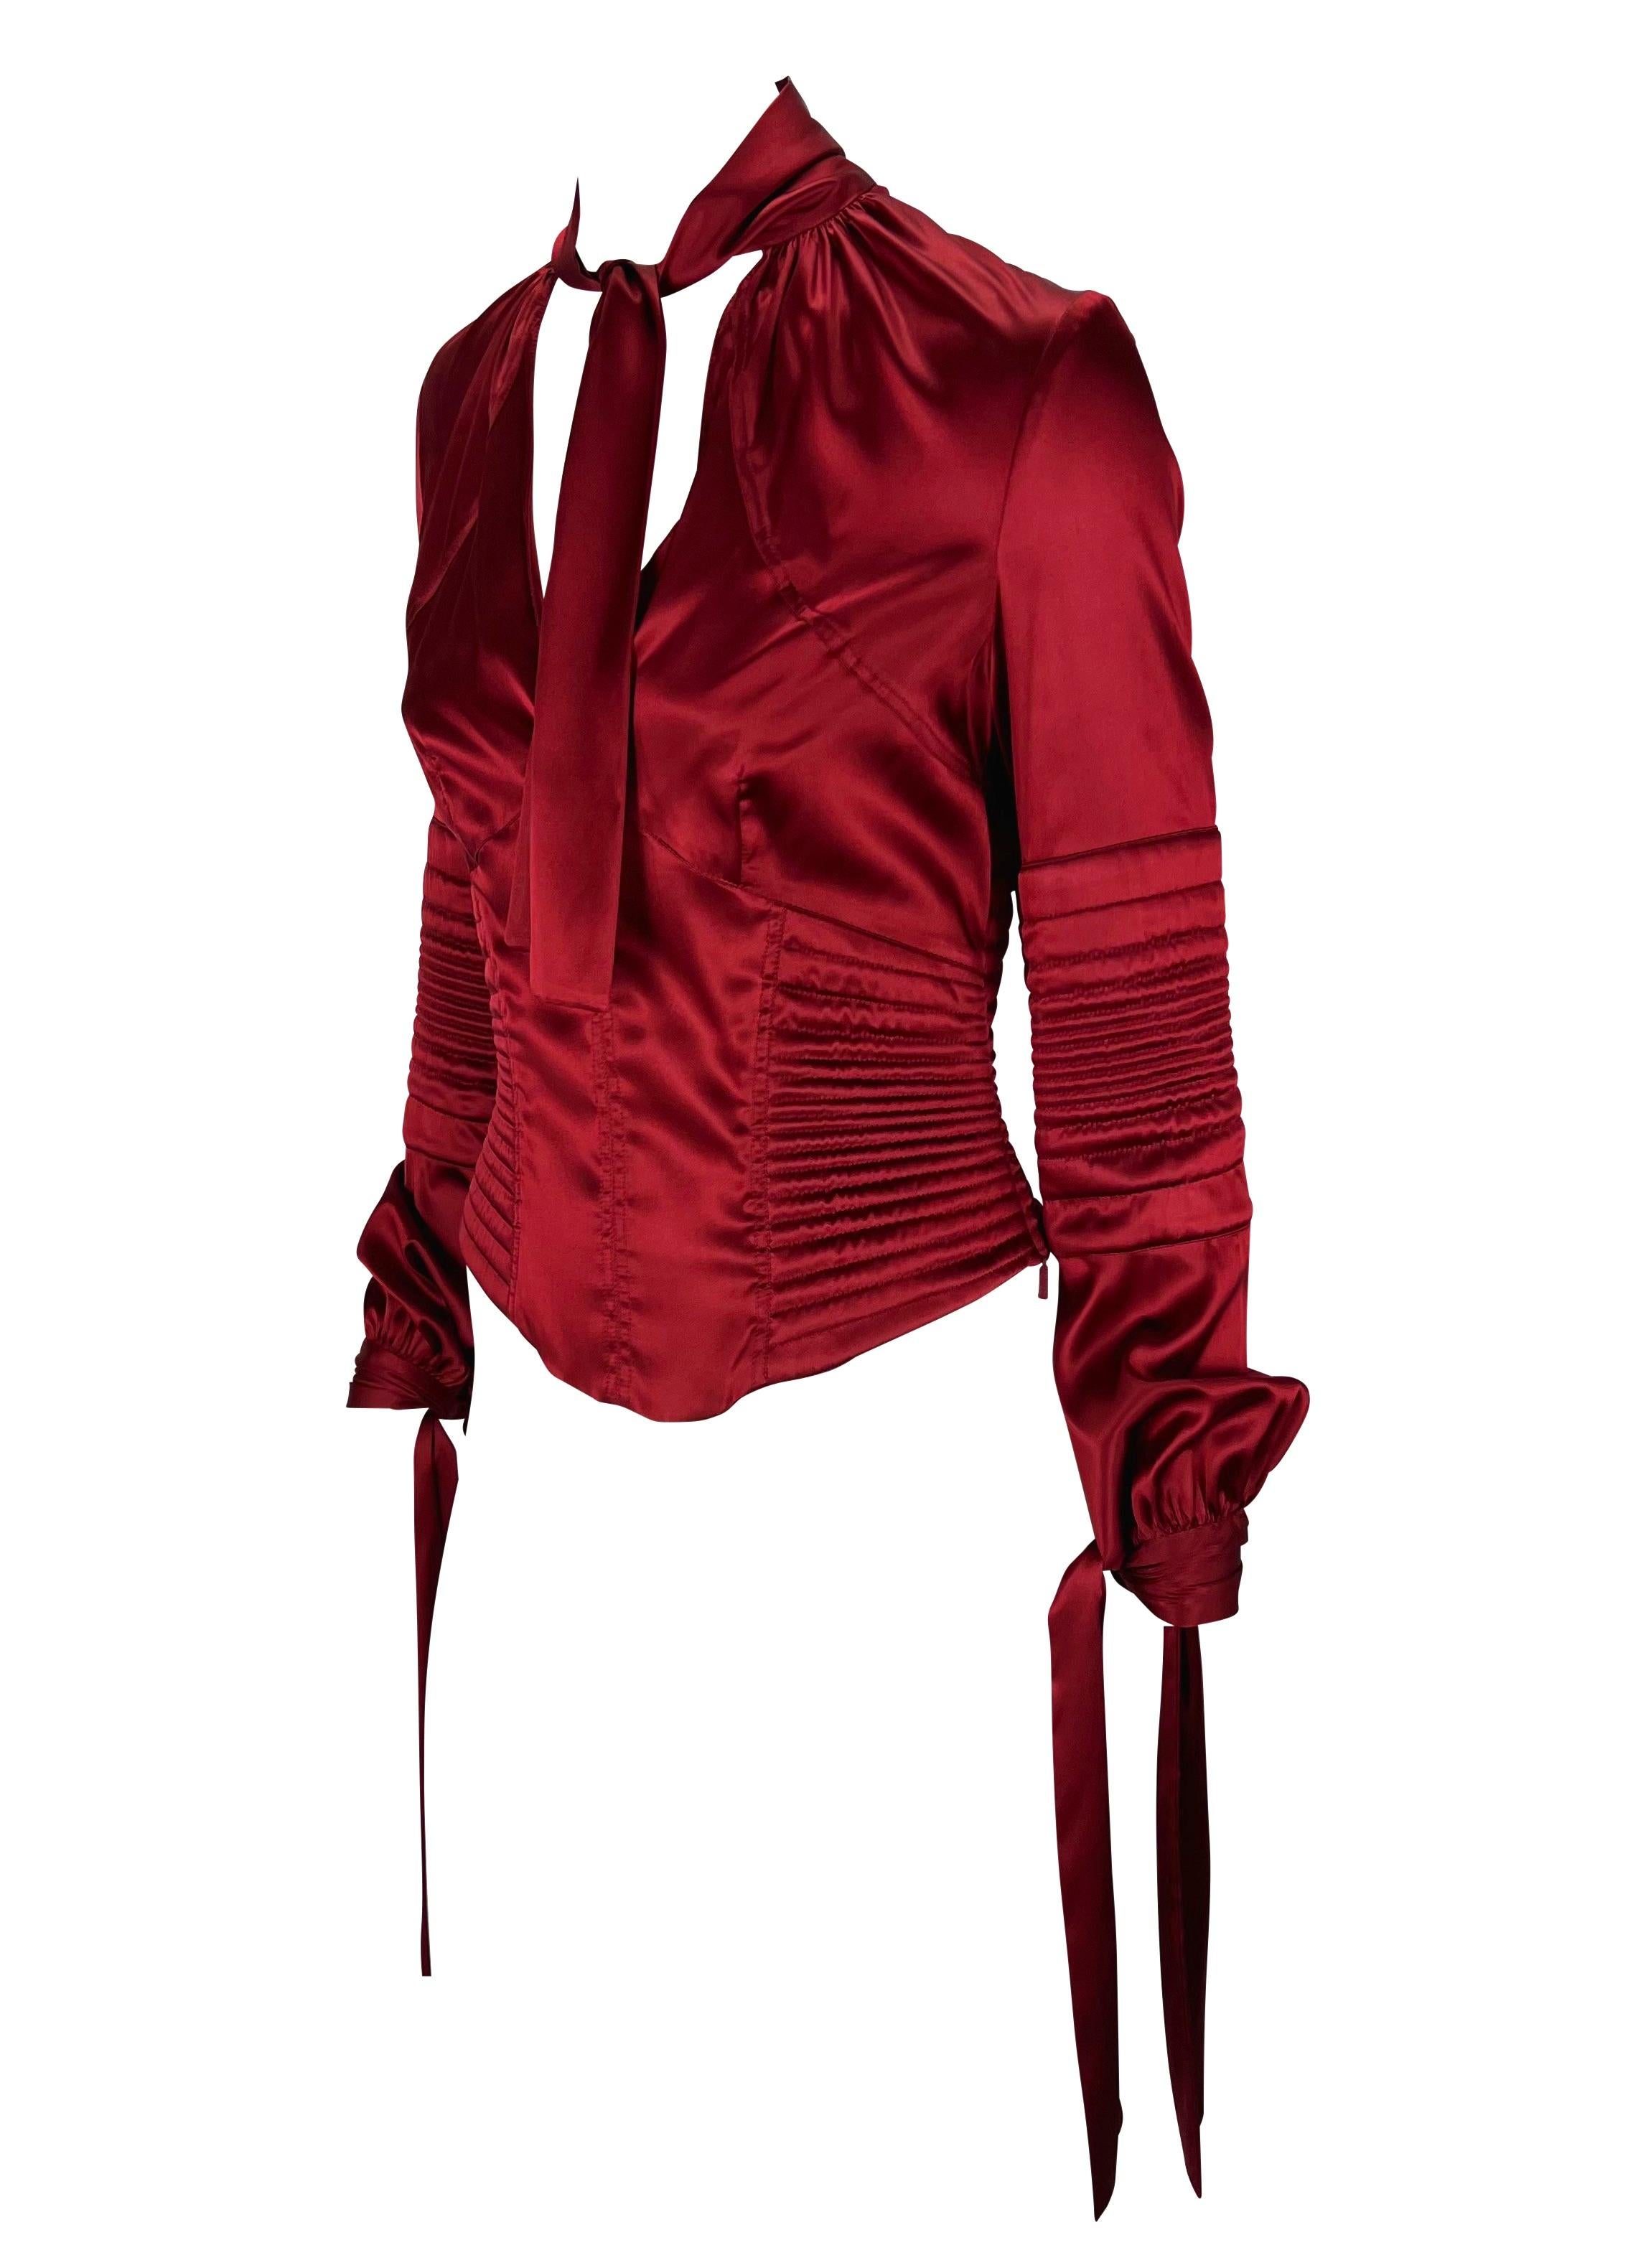 Presenting a vibrant red silk satin Gucci blouse designed by Tom Ford. From the Fall/Winter 2003 collection, this beautiful top features quilted details on the body creating a corset silhouette. With a deep neckline, this top has ties that wrap